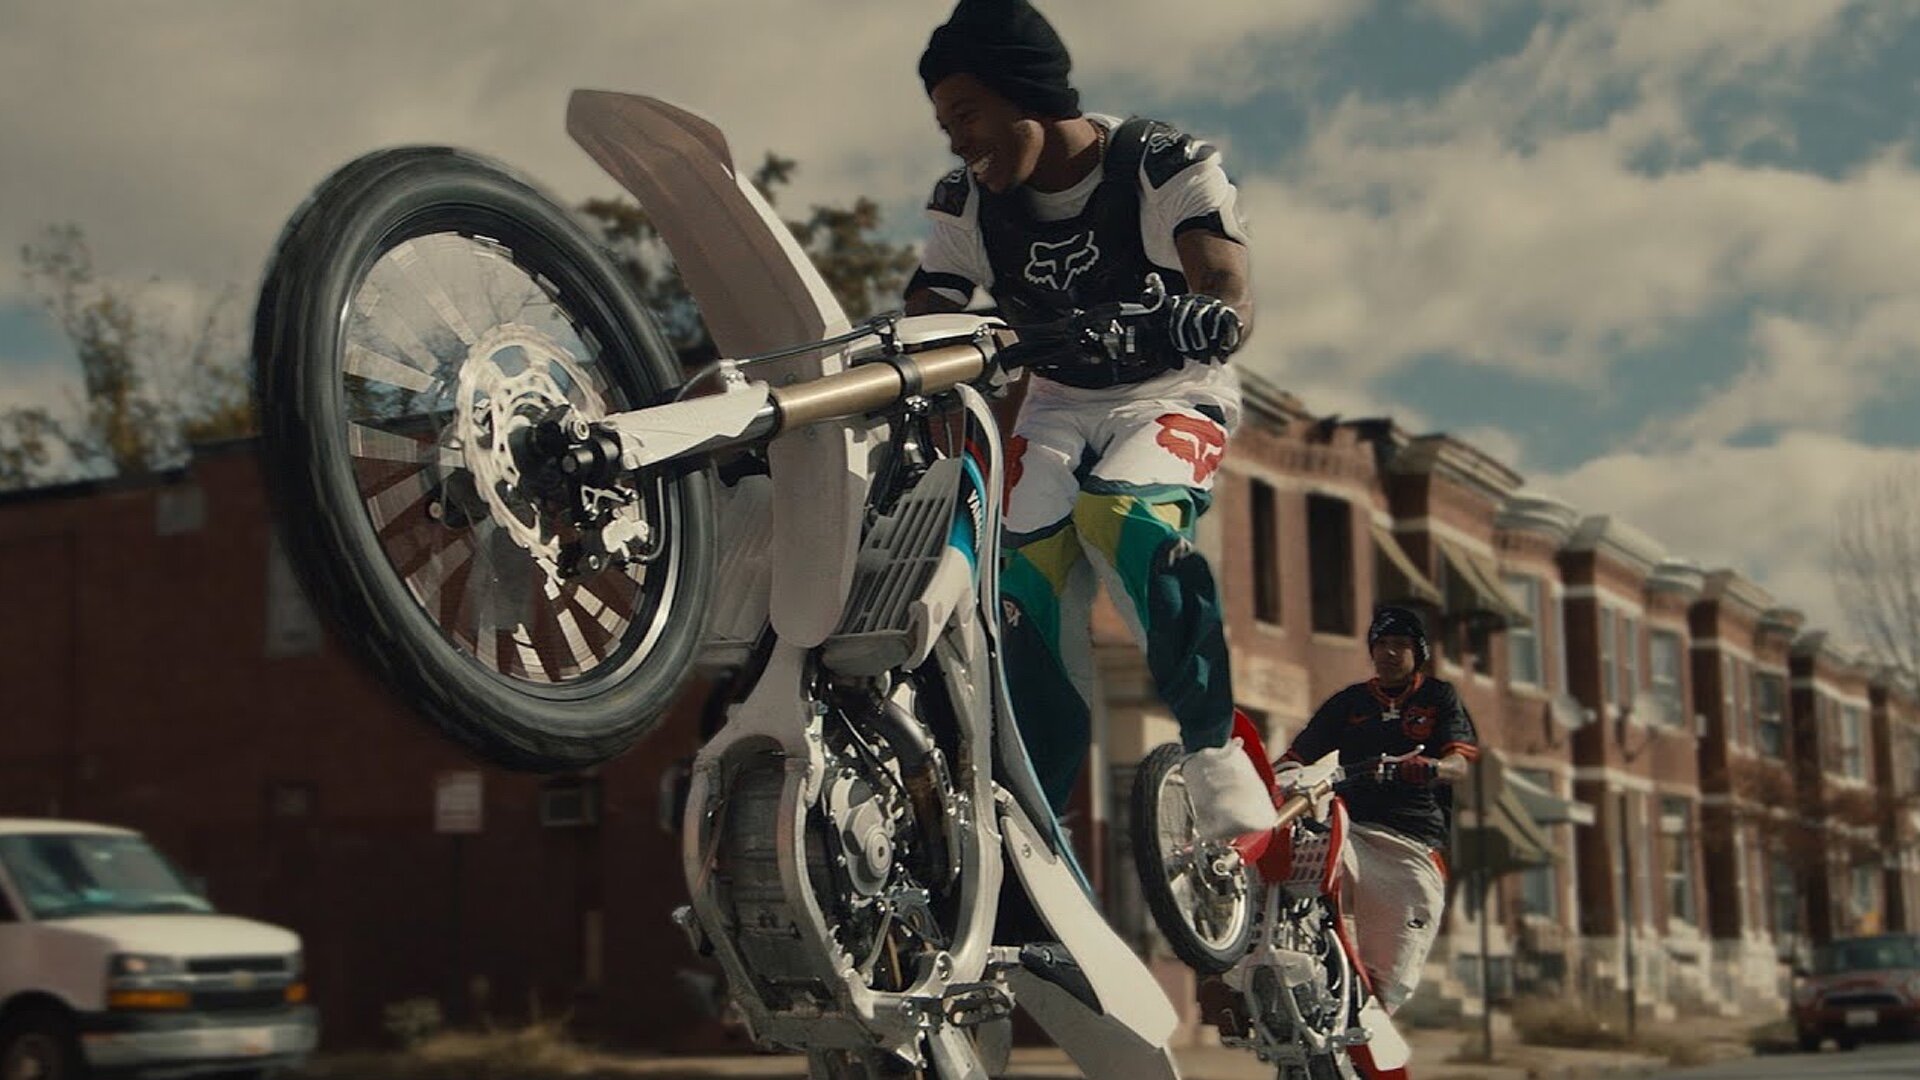 Great Trailer for the Baltimore Dirt-Bike Rider Film CHARM CITY